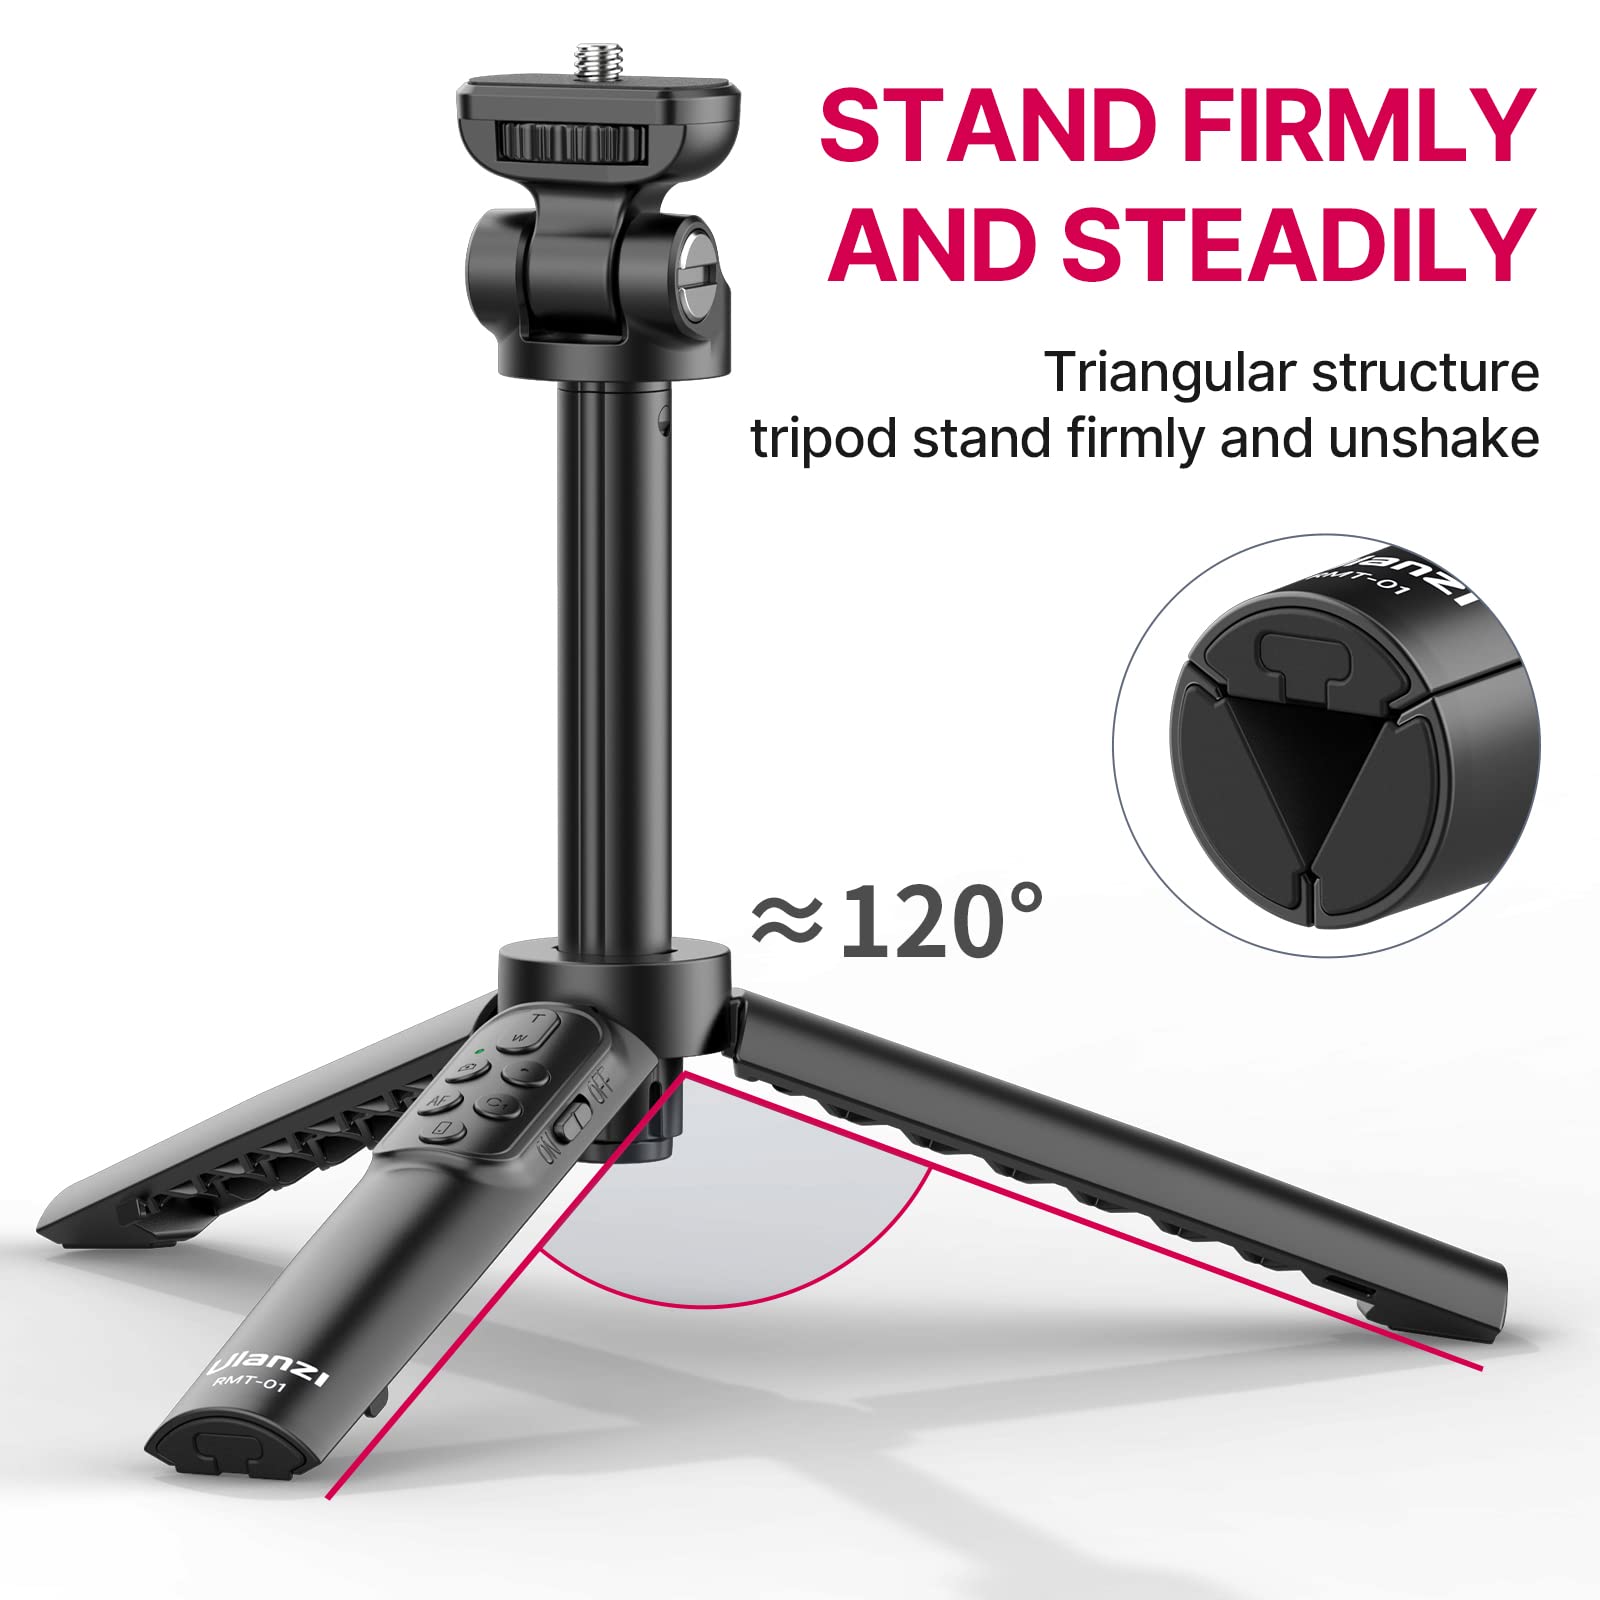 ULANZI RMT-01 Wireless Shooting Grip and Tripod for Sony, Canon, Nikon, and Other Vlog Cameras or Smartphones, Selfie Video Recording Vlogging Accessories for Content Creators and Vloggers